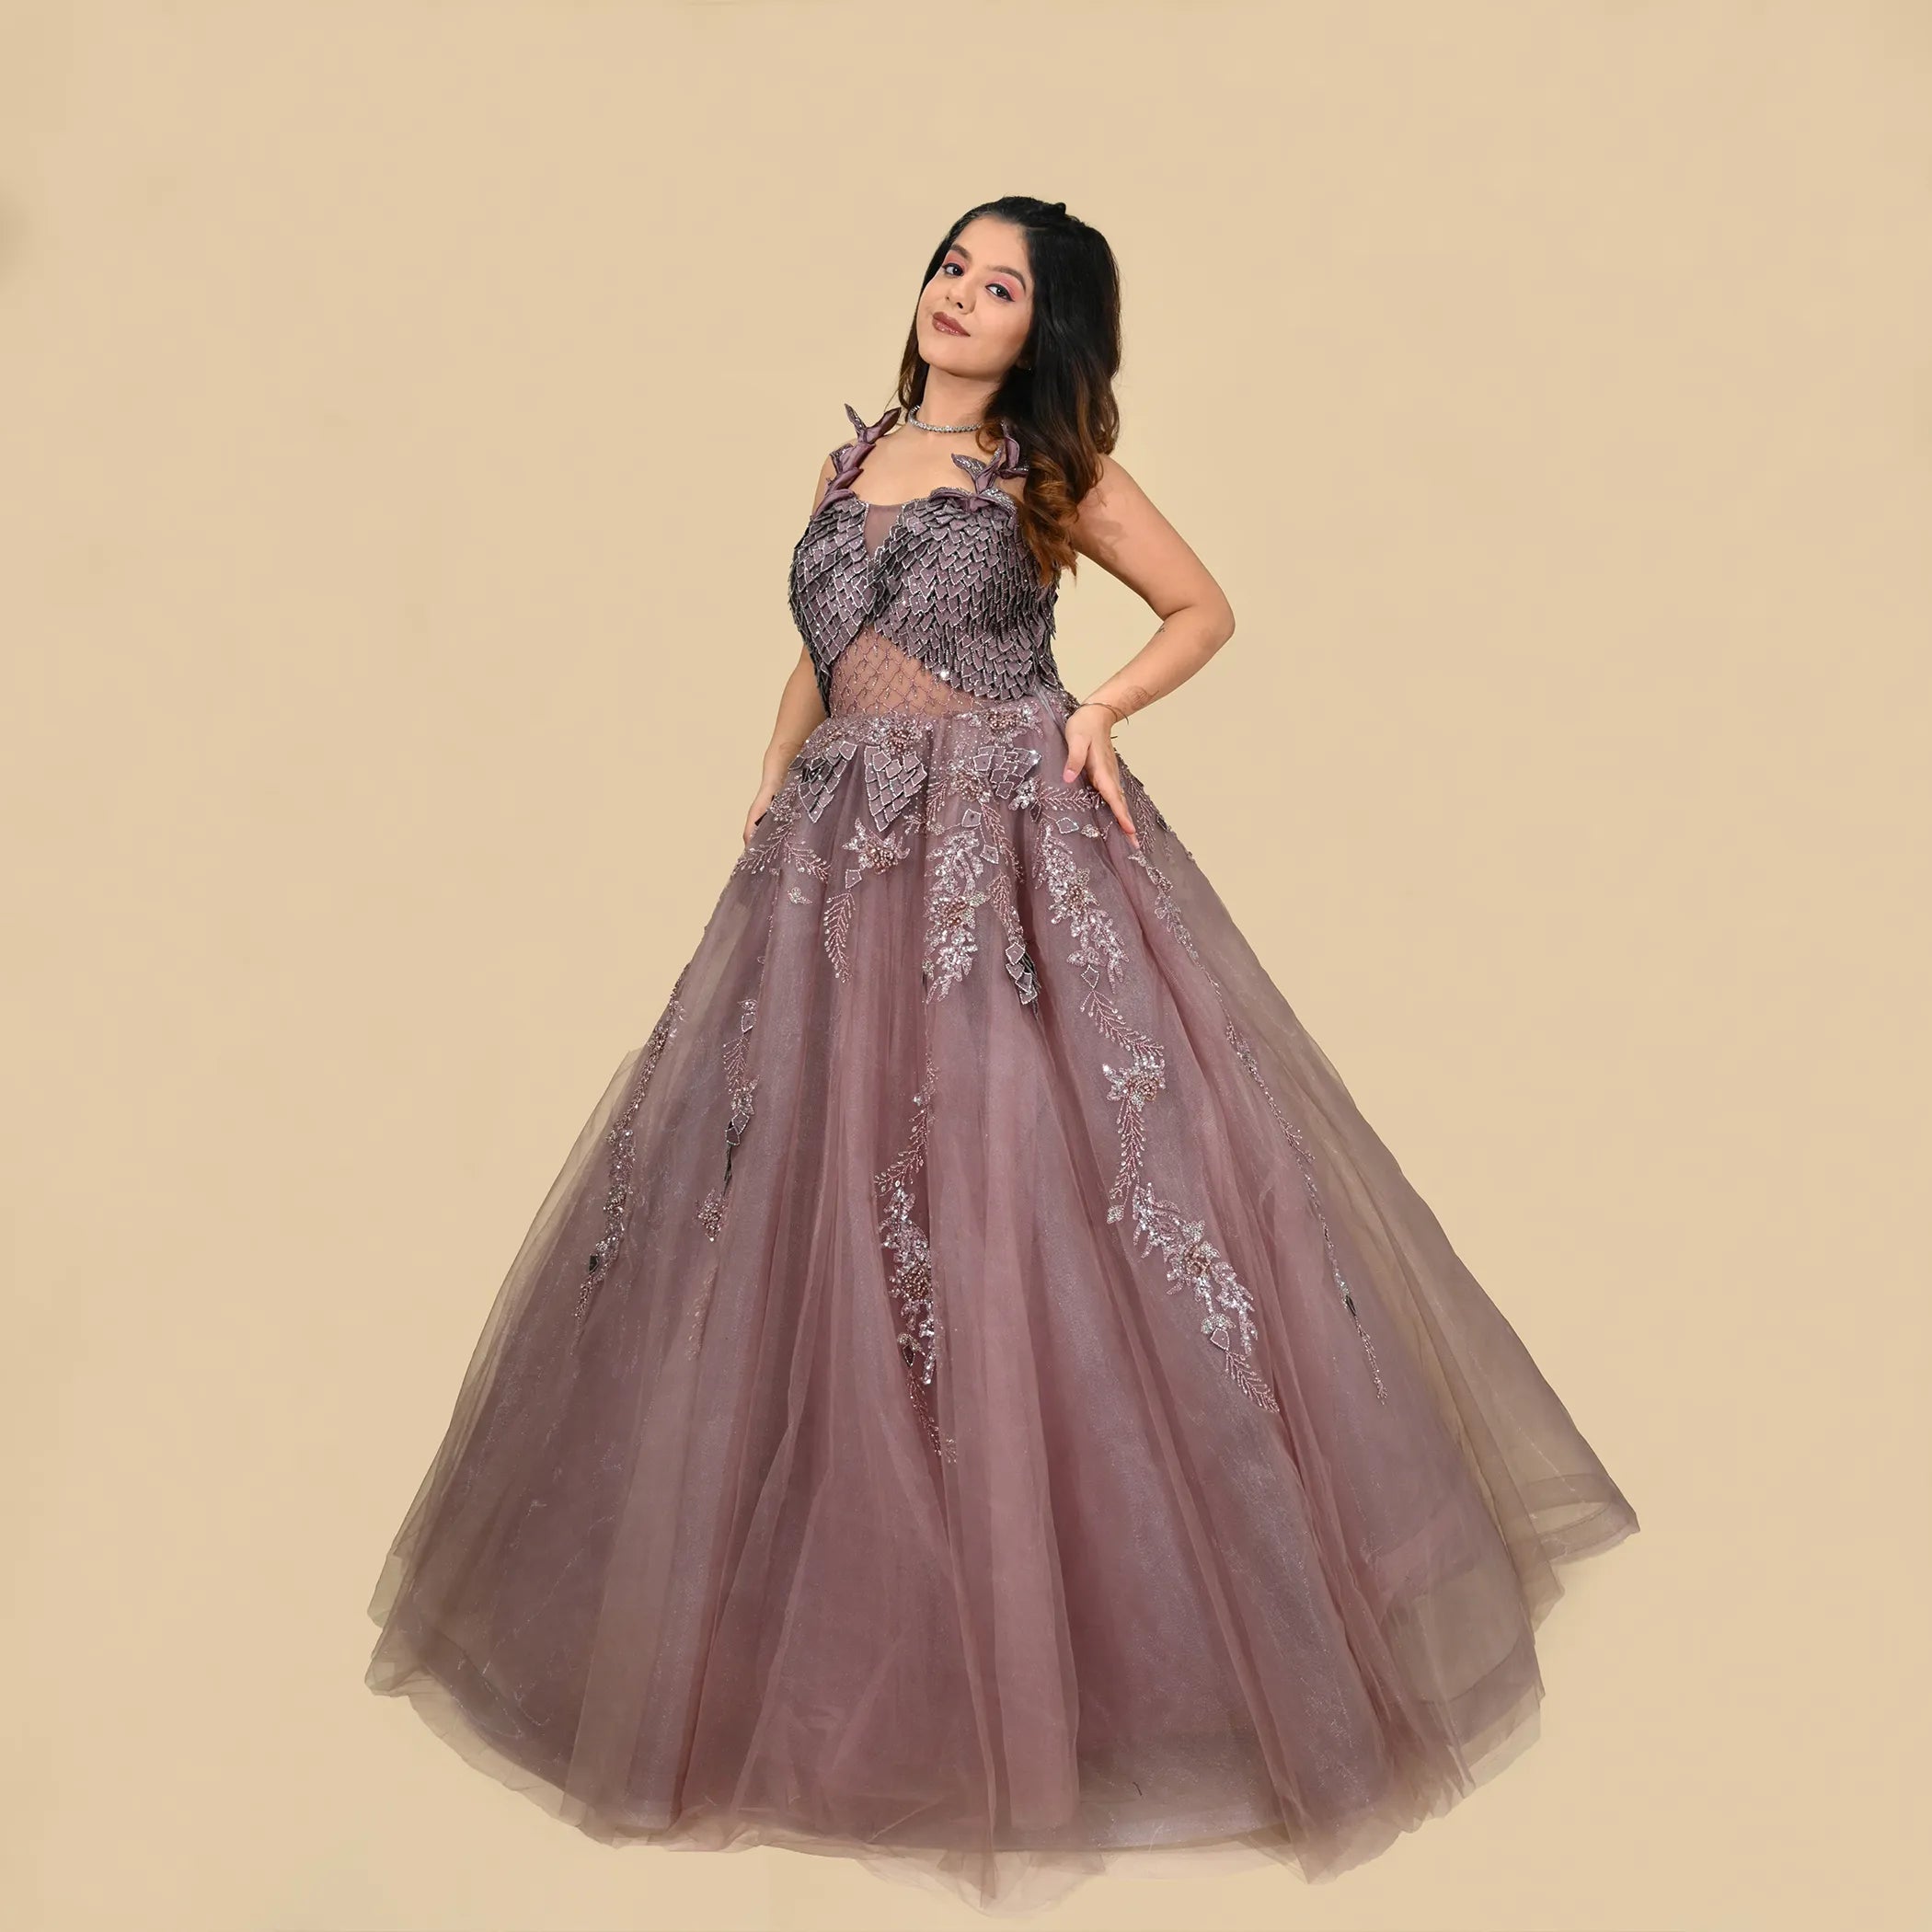 BARBIE GOWN FOR ENGAGEMENT BUY NOW FROM APKI APNI DUKAN SALUJA  INSTYLE/MOM&ME) For booking please whatspp us on +918640000031  +916363000021... | By Saluja Instyle ludhianaFacebook